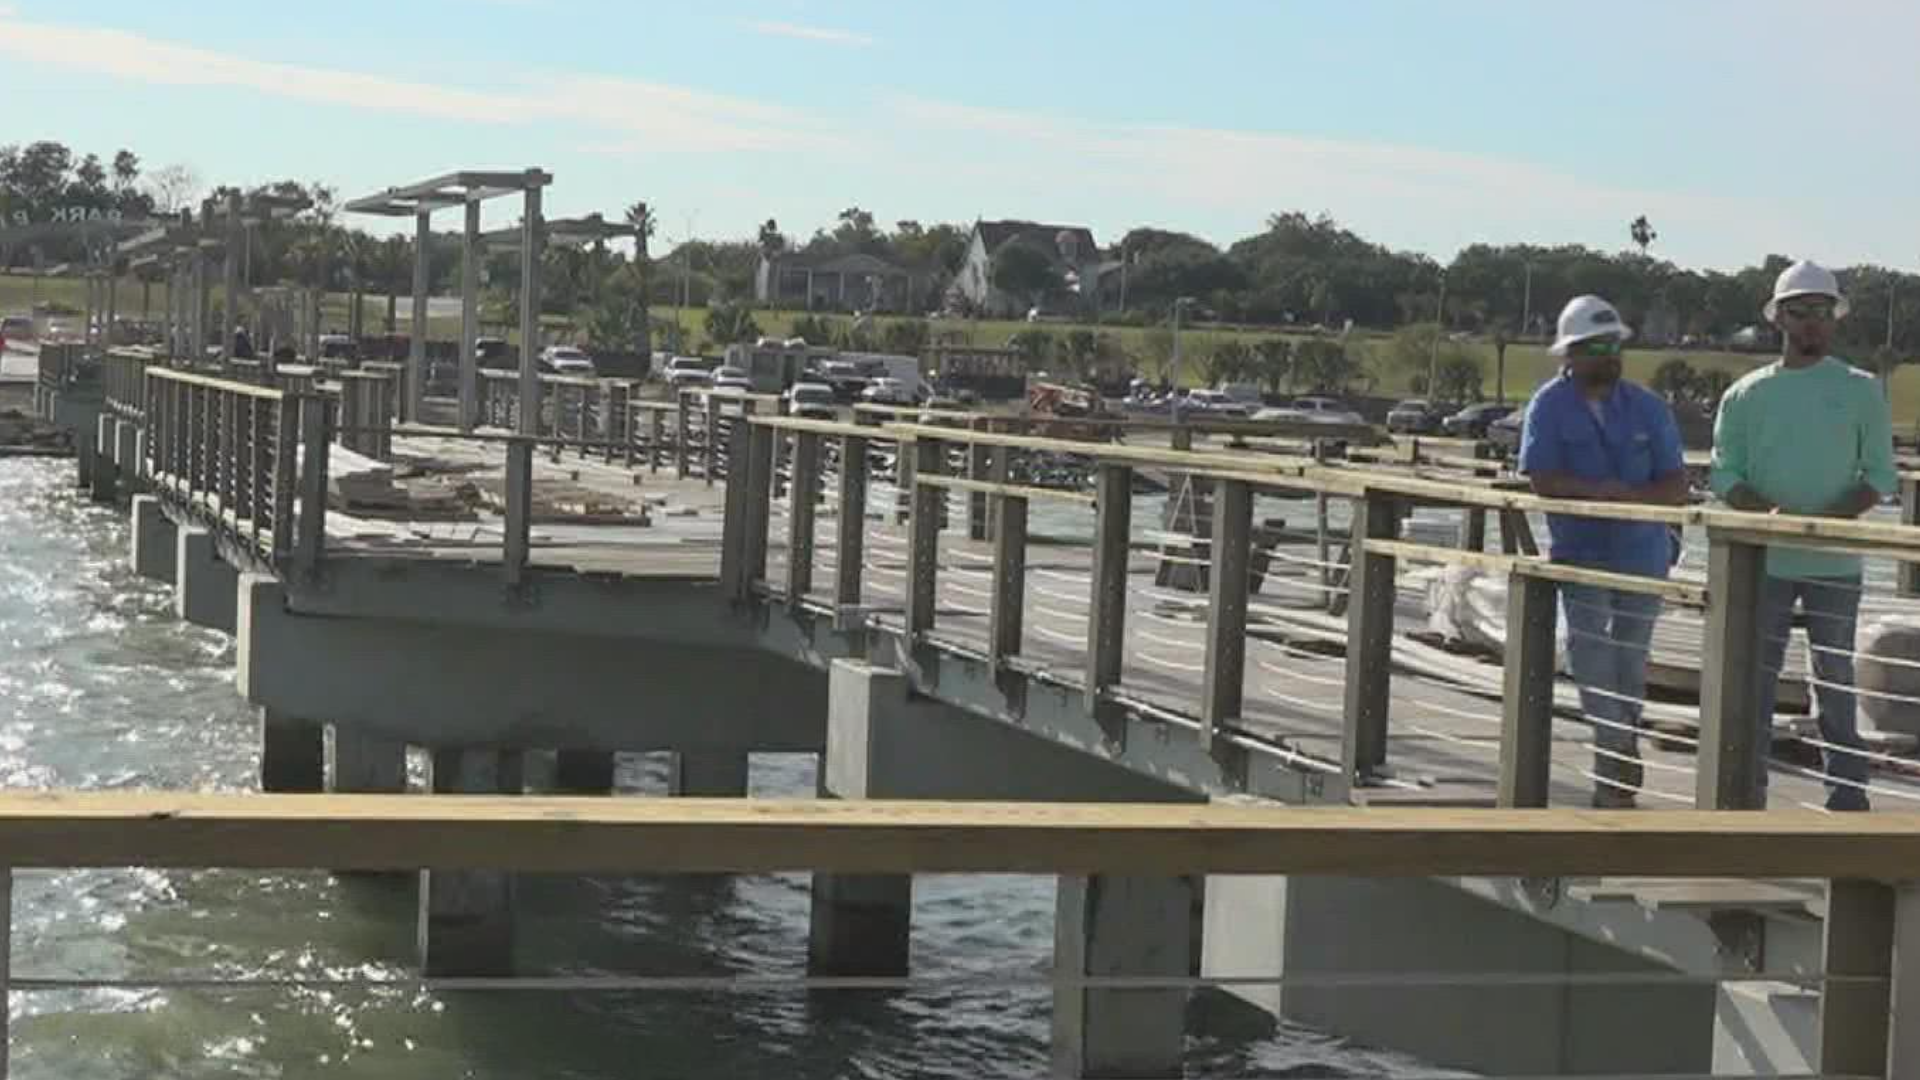 City Mayor Paulette Guajardo was able to view the progress of the pier, and was impressed by the many improvements.